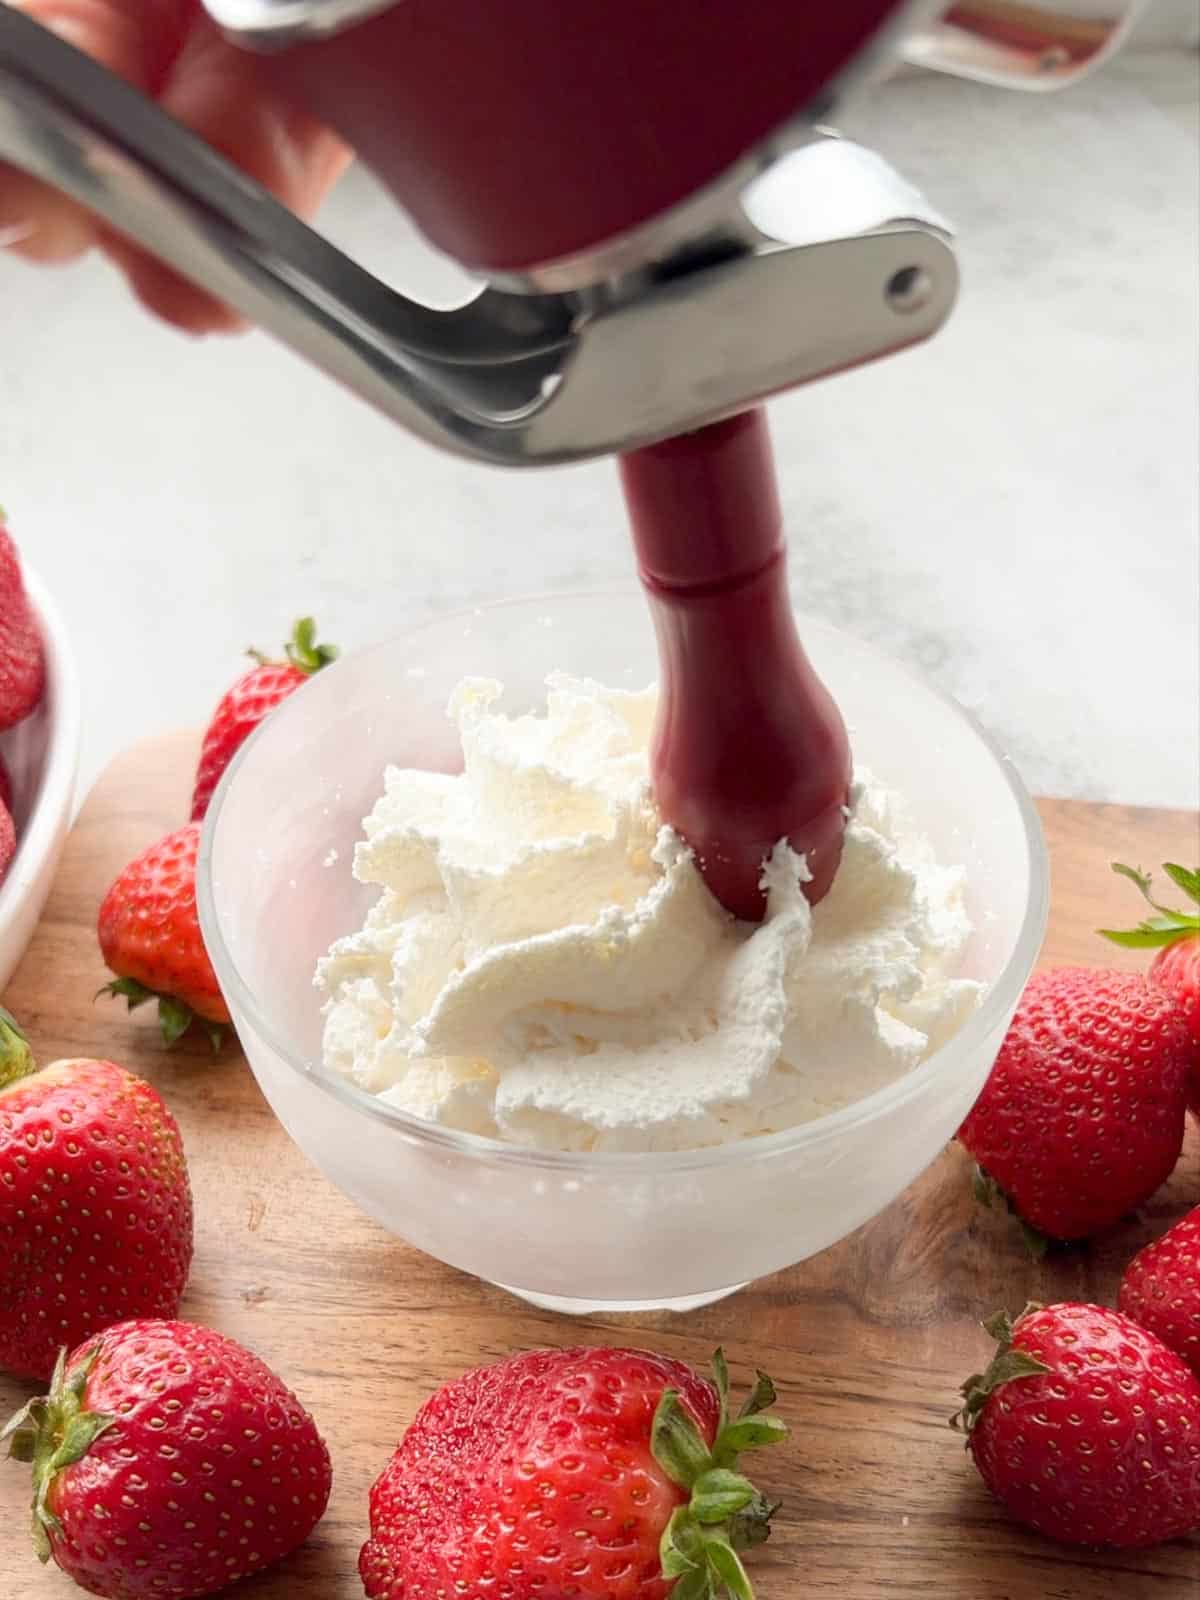 Whipped cream is dispensed in a bowl.